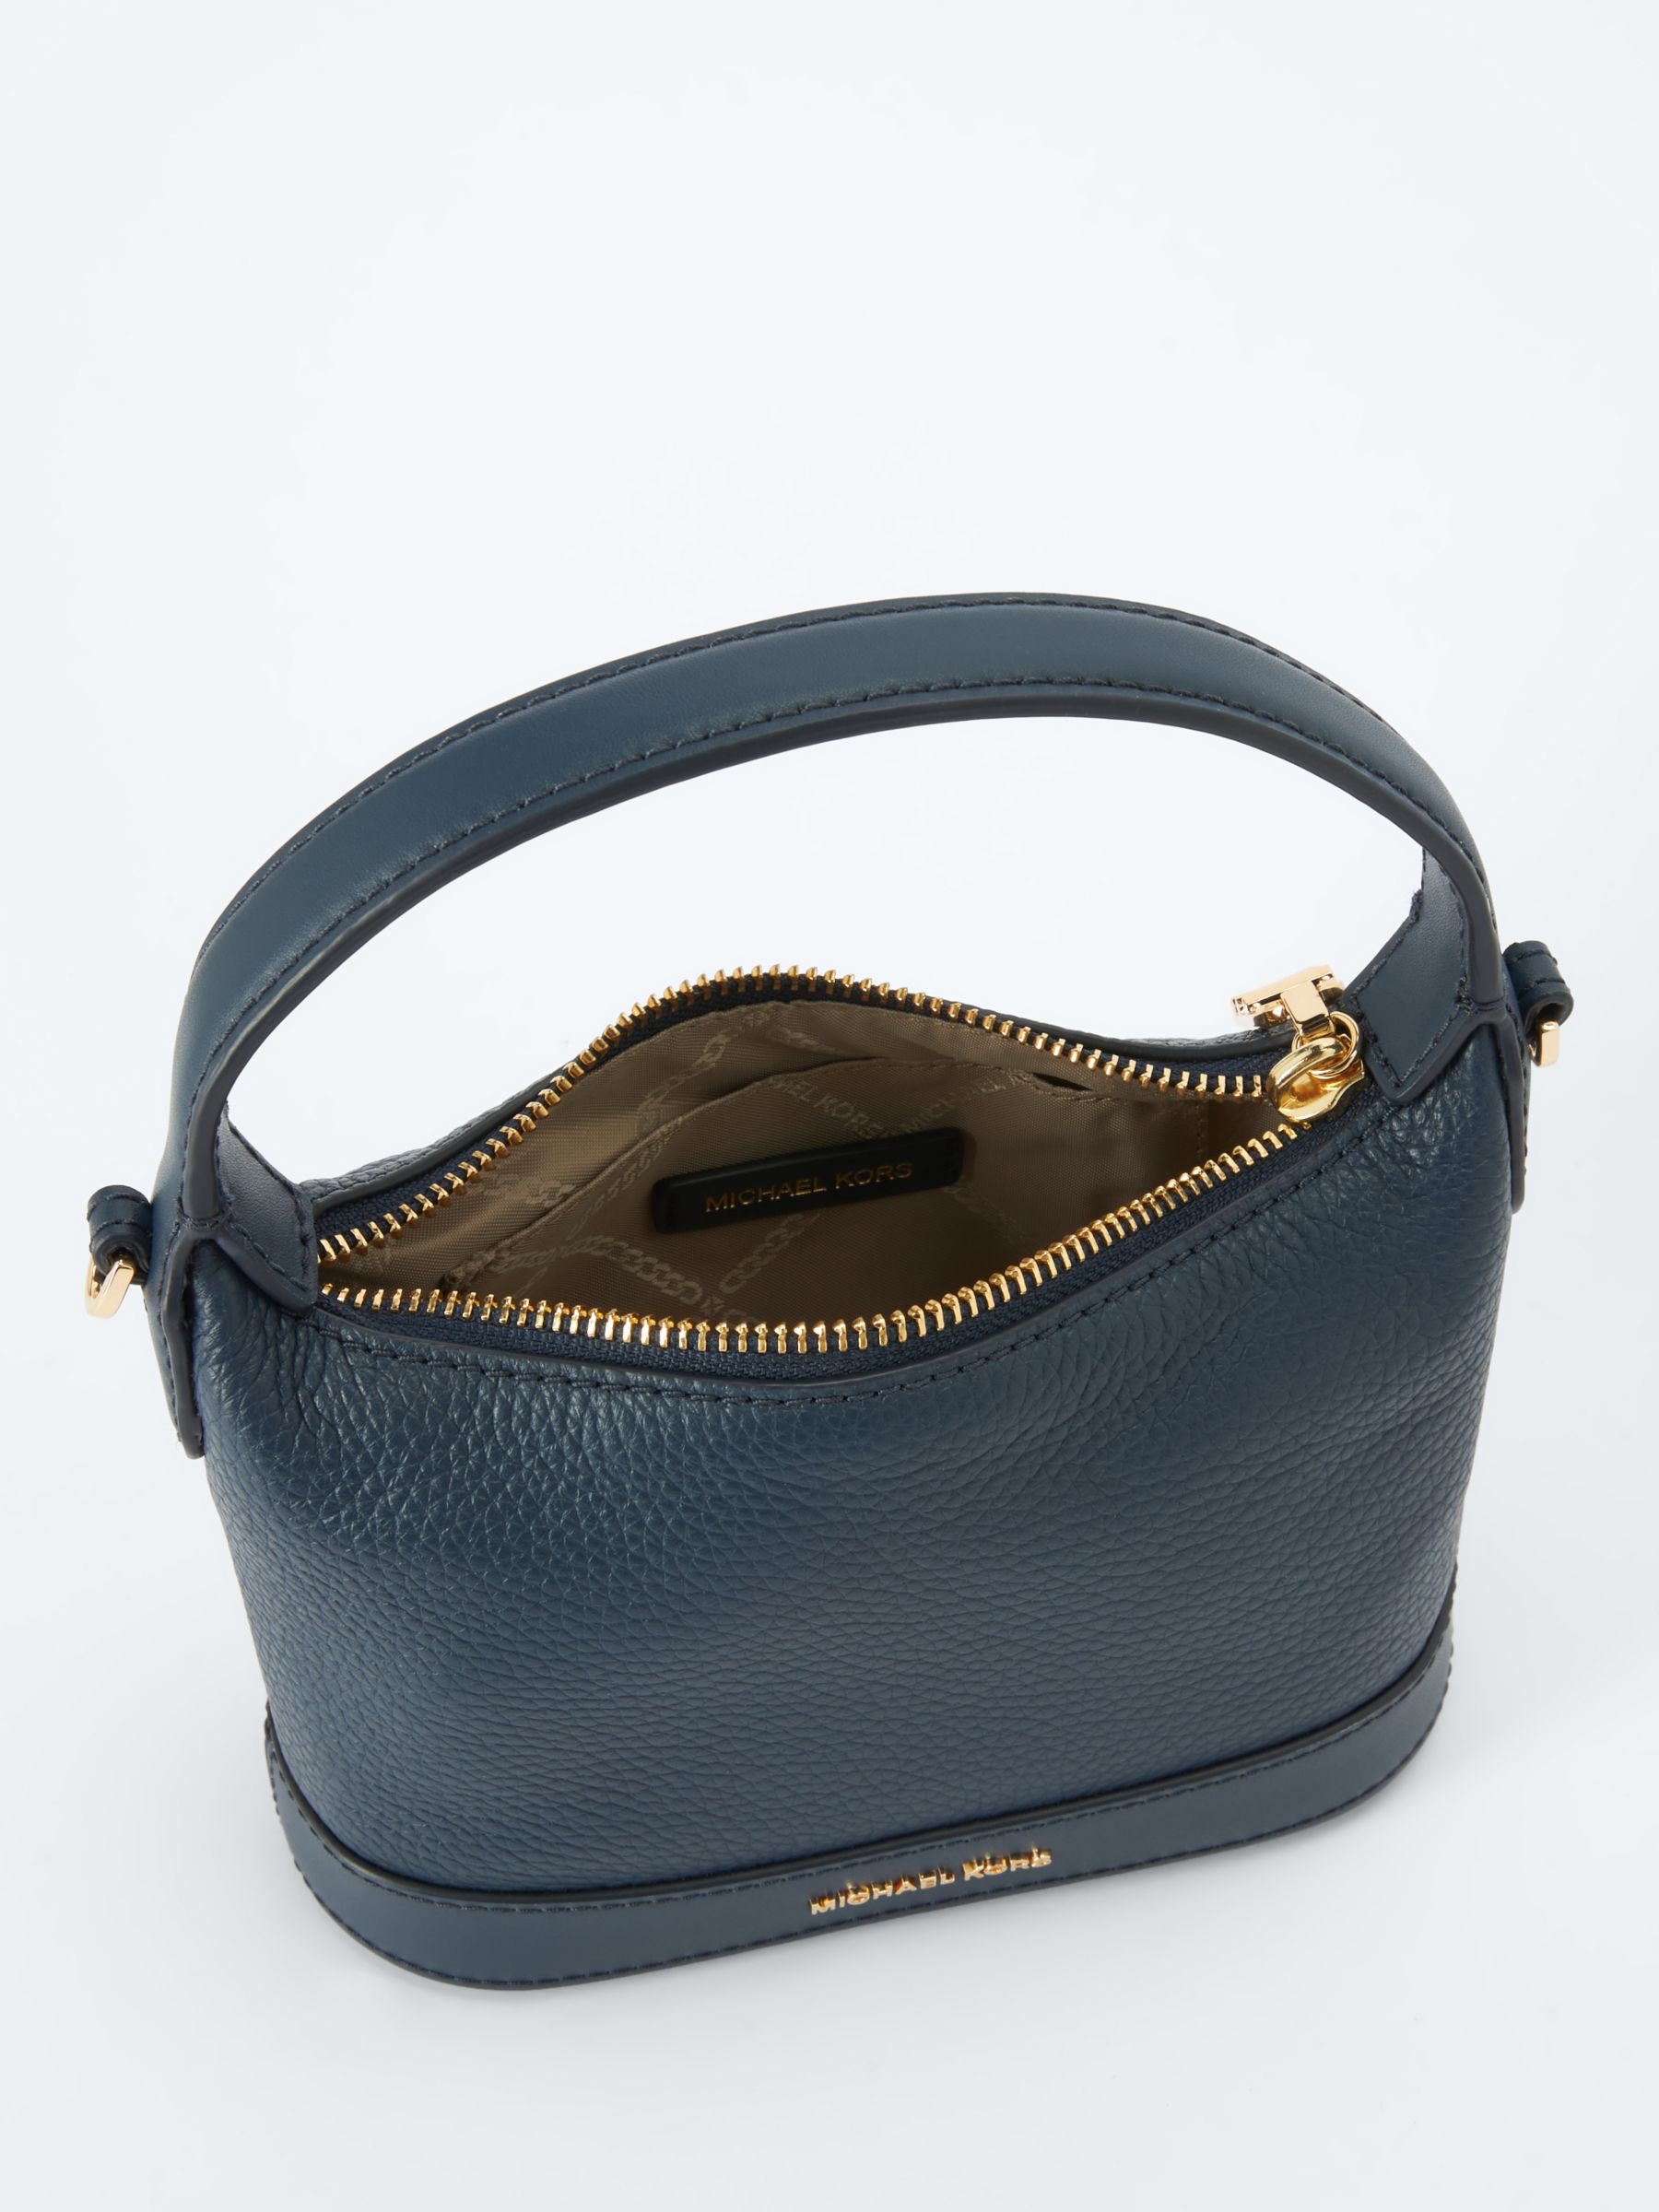 Buy Michael Kors Wythe Small Leather Crossbody Bag Online at johnlewis.com